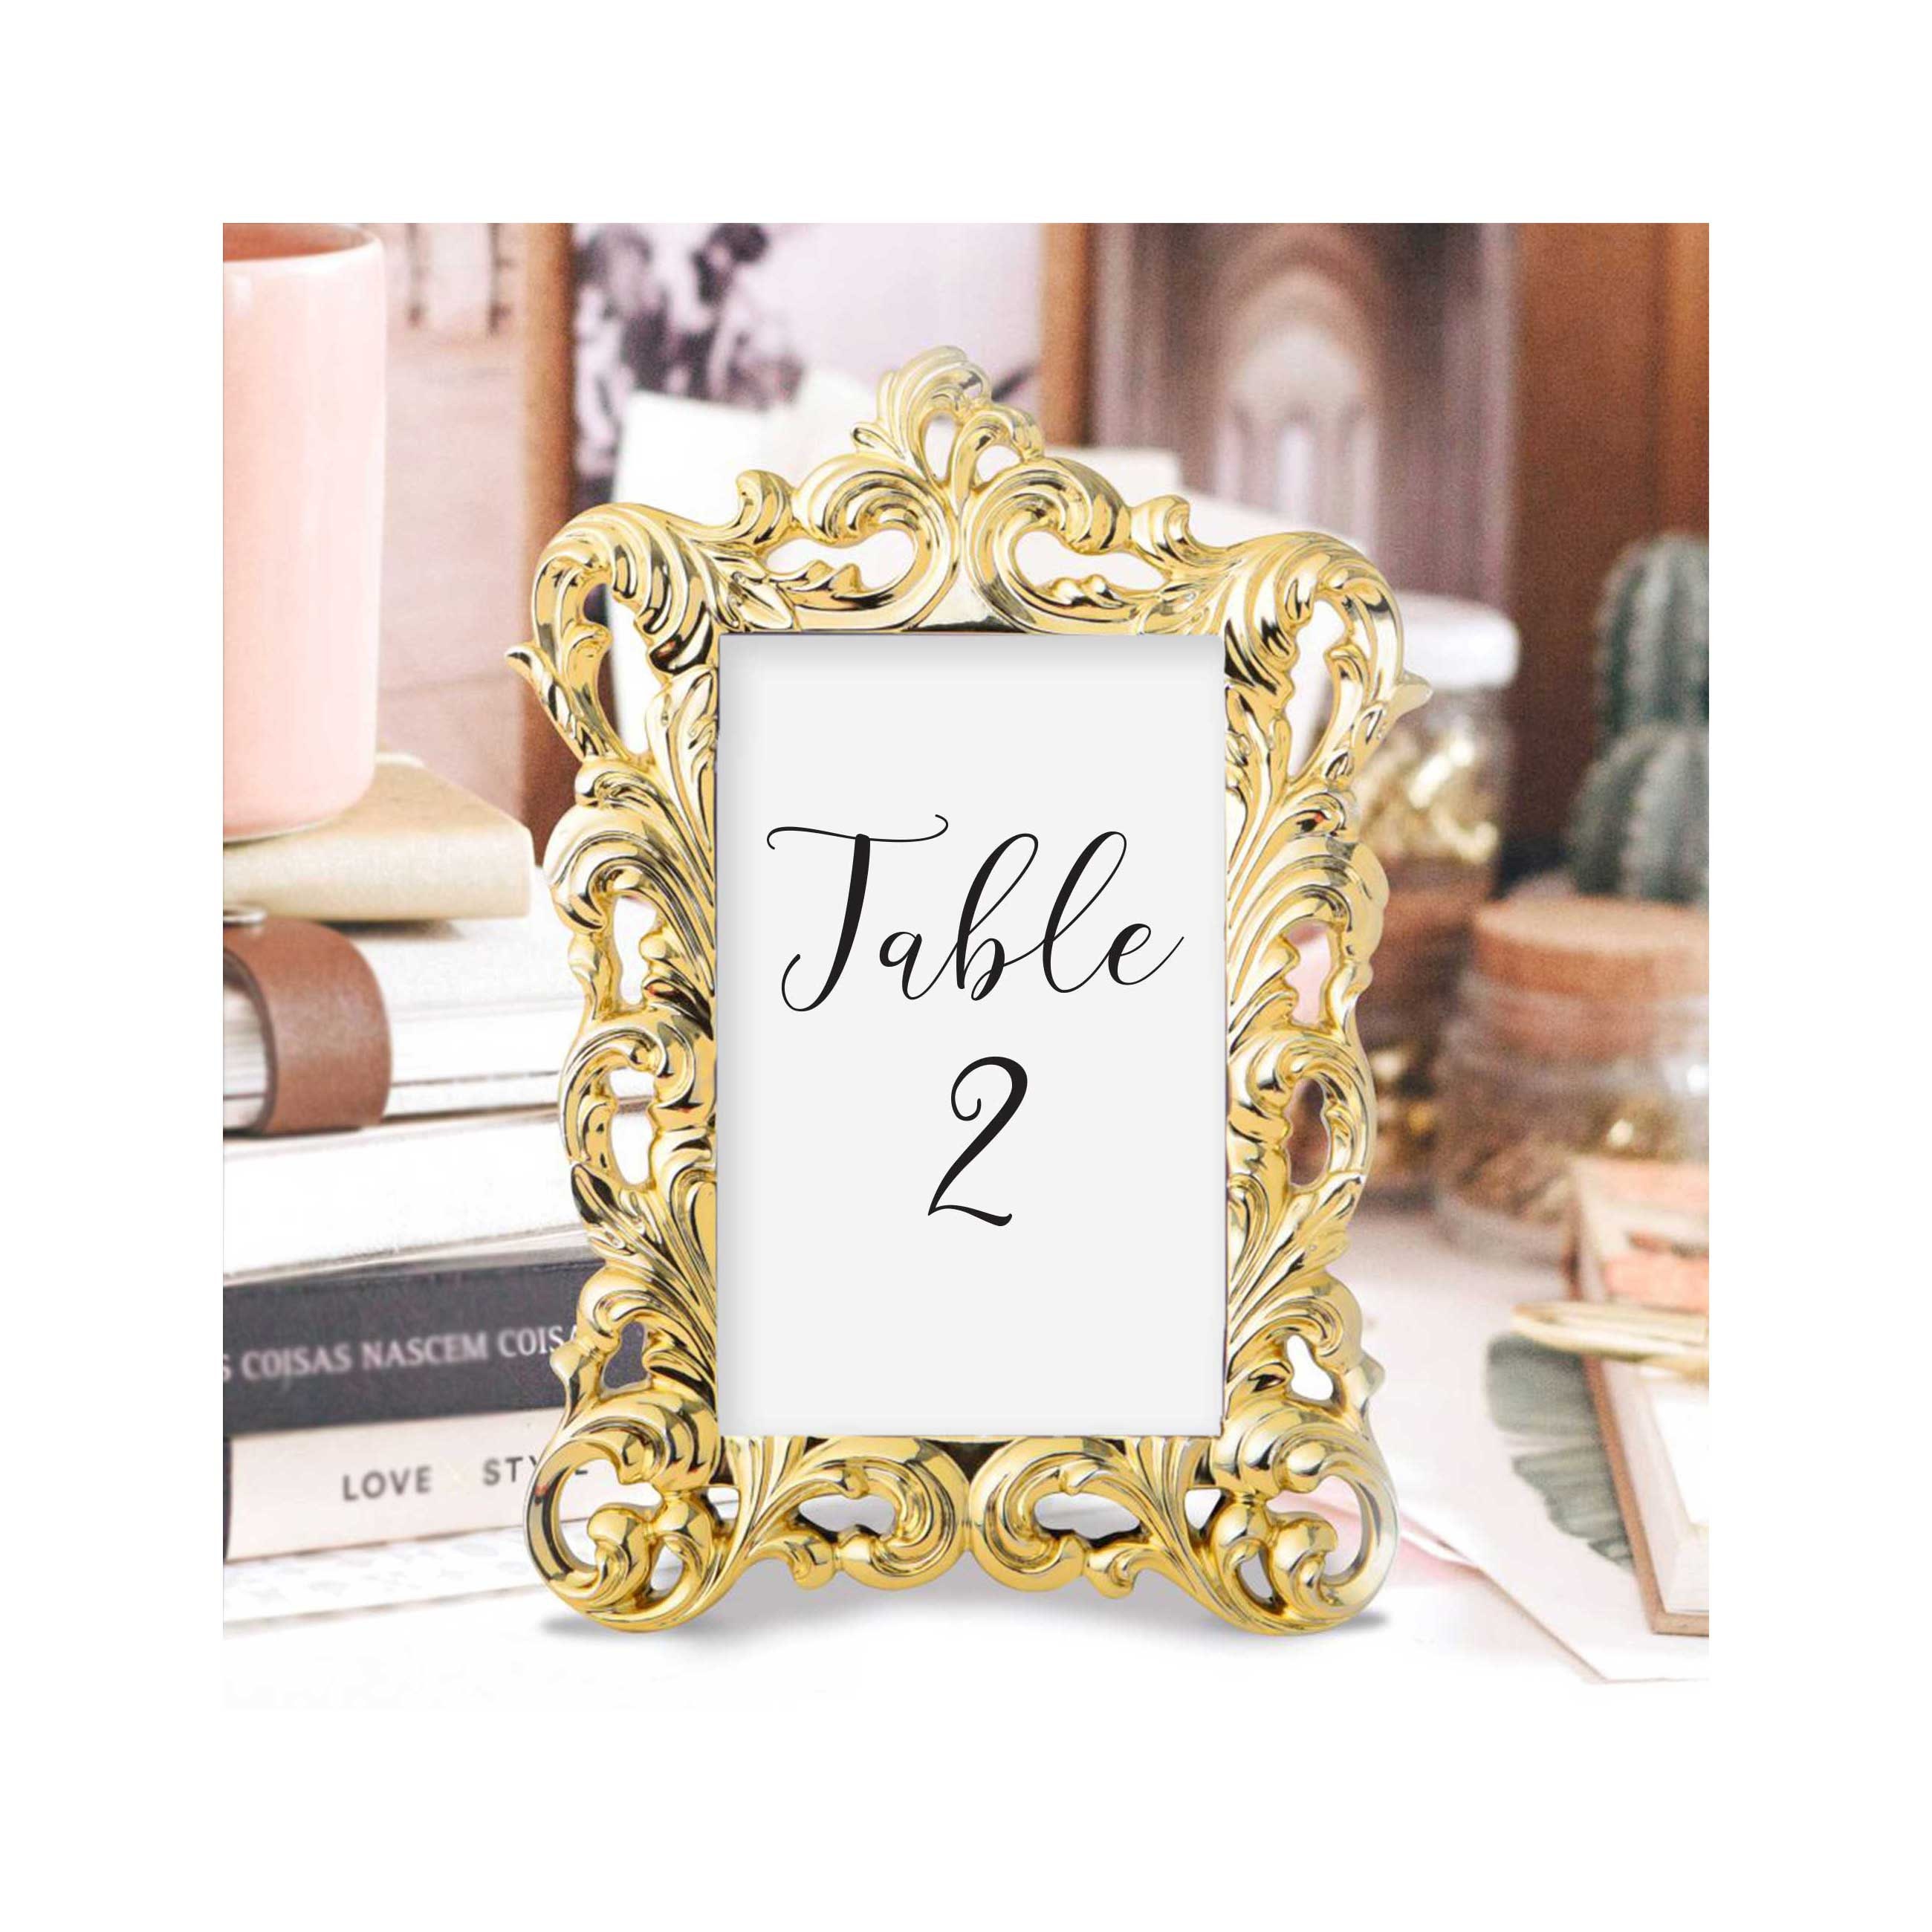 5 x 7 Picture Frames 6-Pack – Floating Frame Set for Table Numbers, Wedding Signs, Photos, or Table Decor by Great Northern Party - Gold